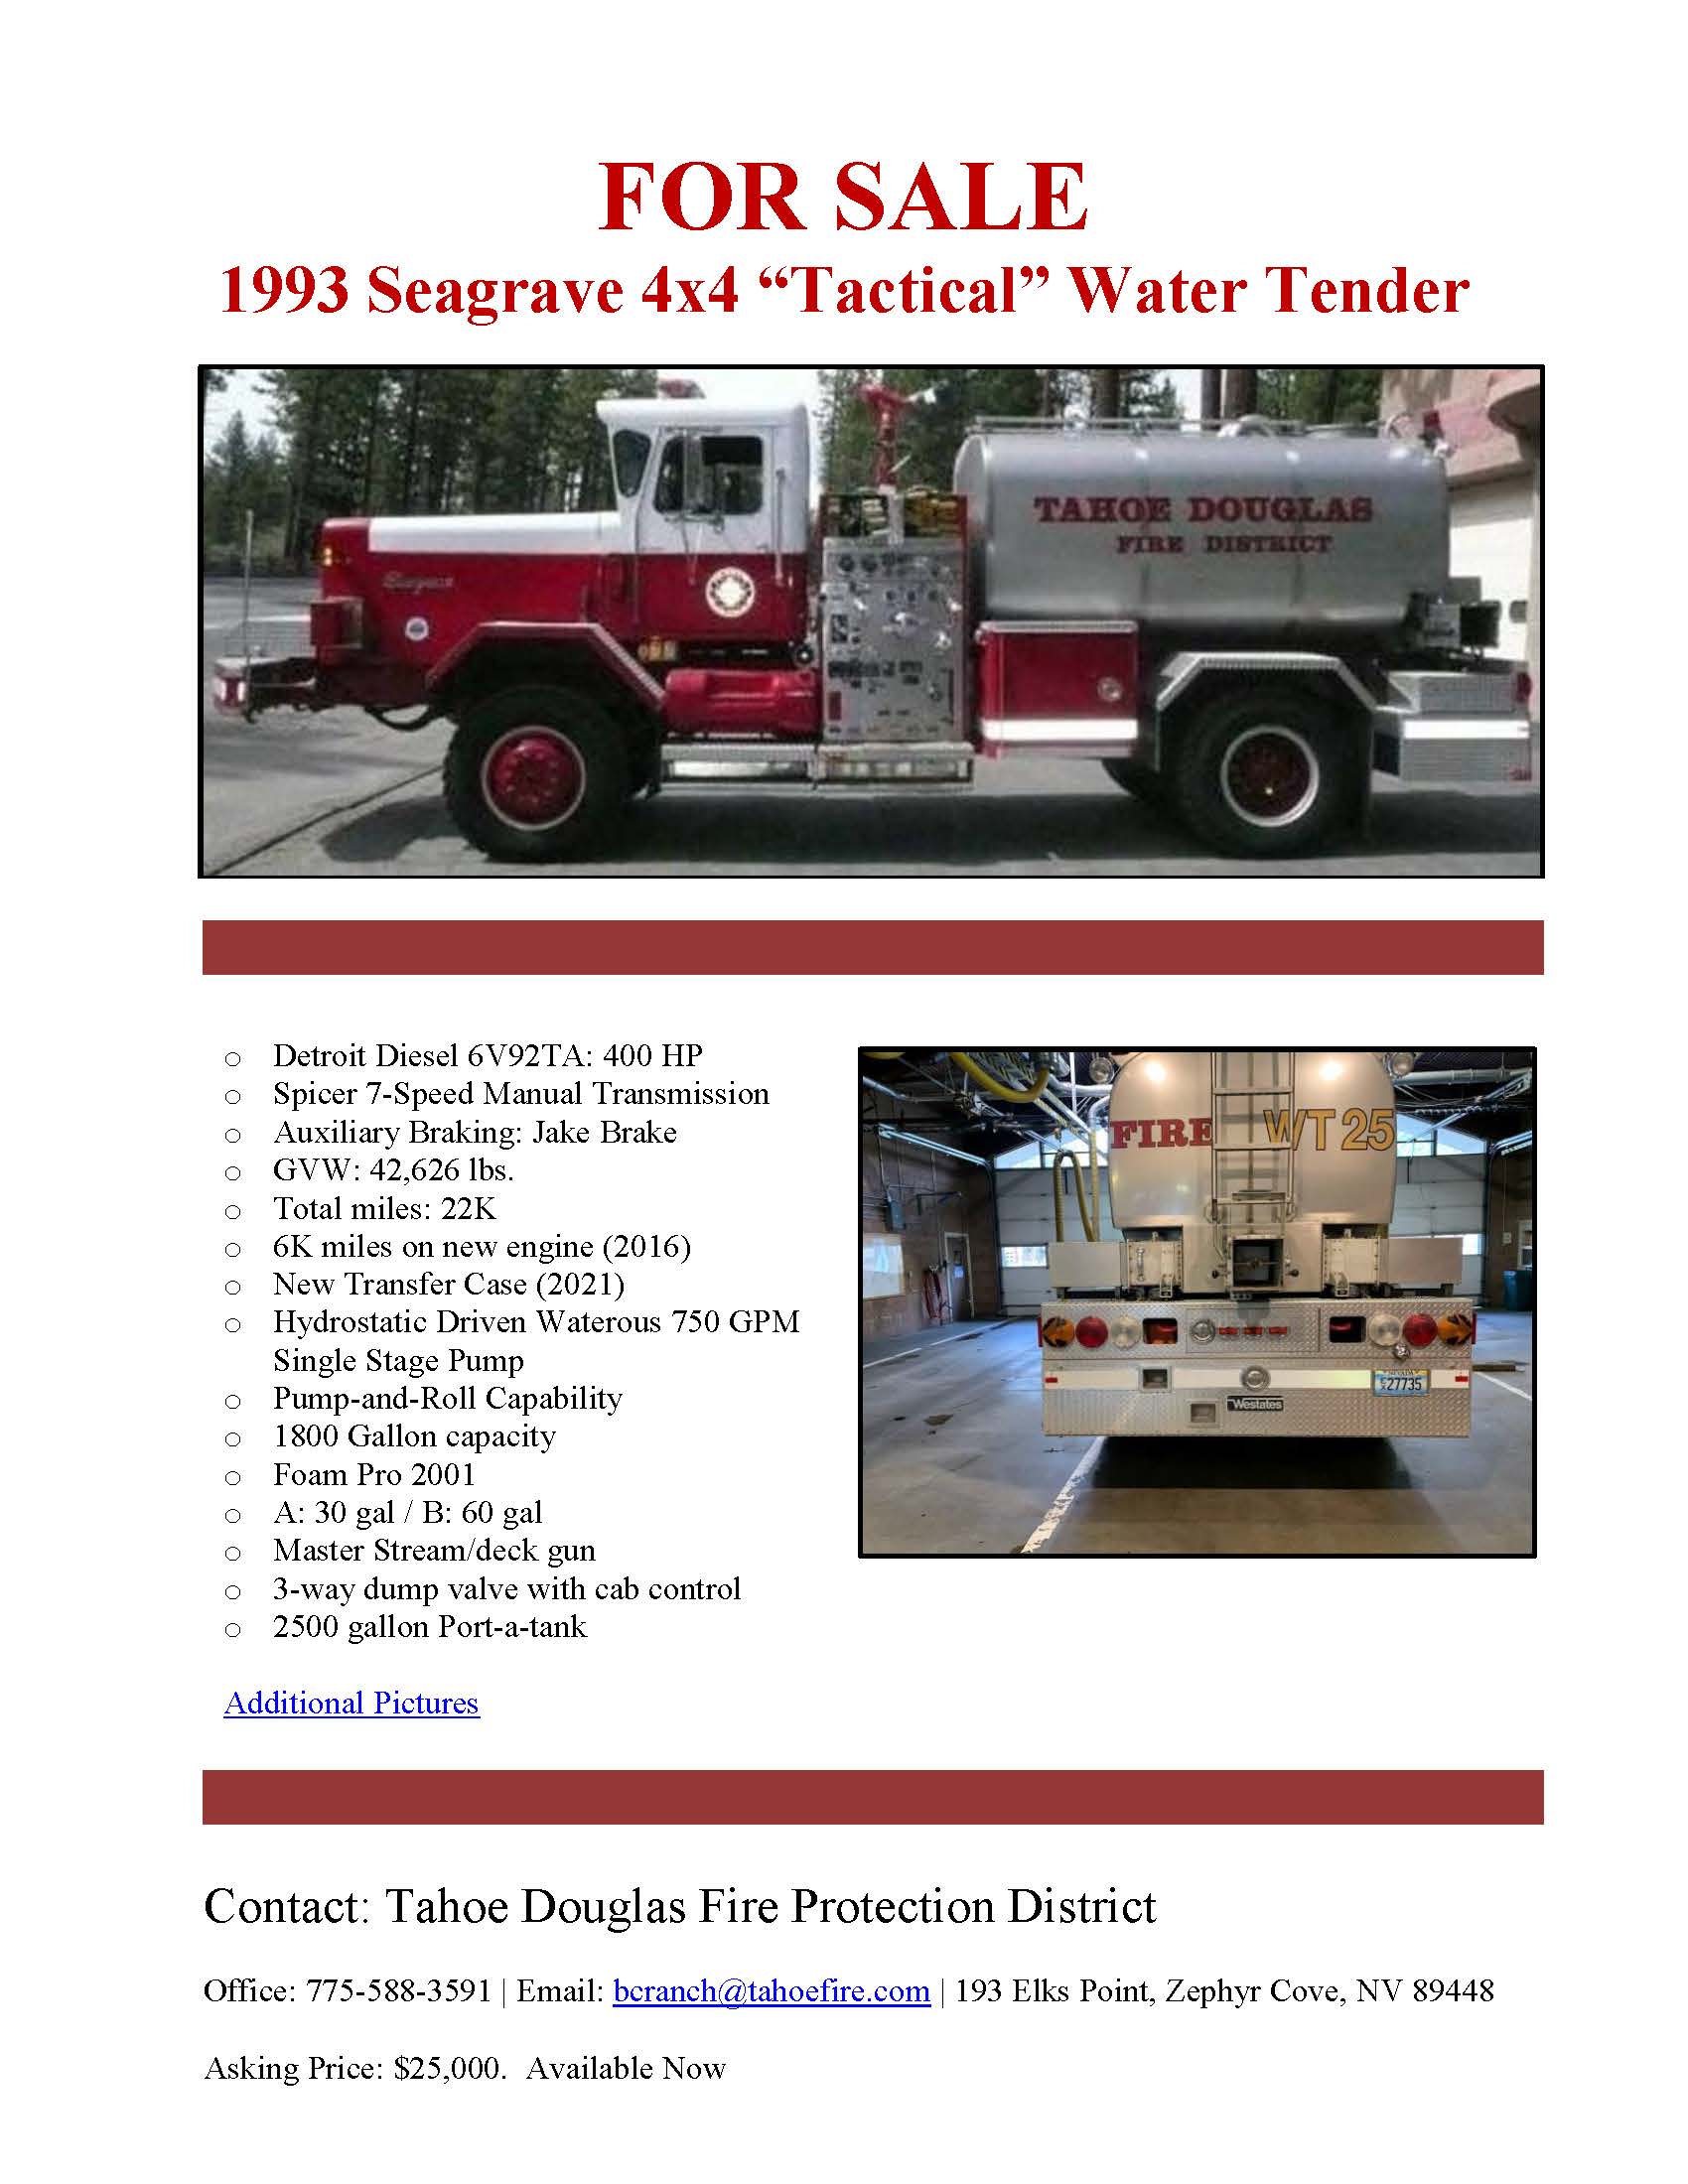 WATER TENDER FOR SALE